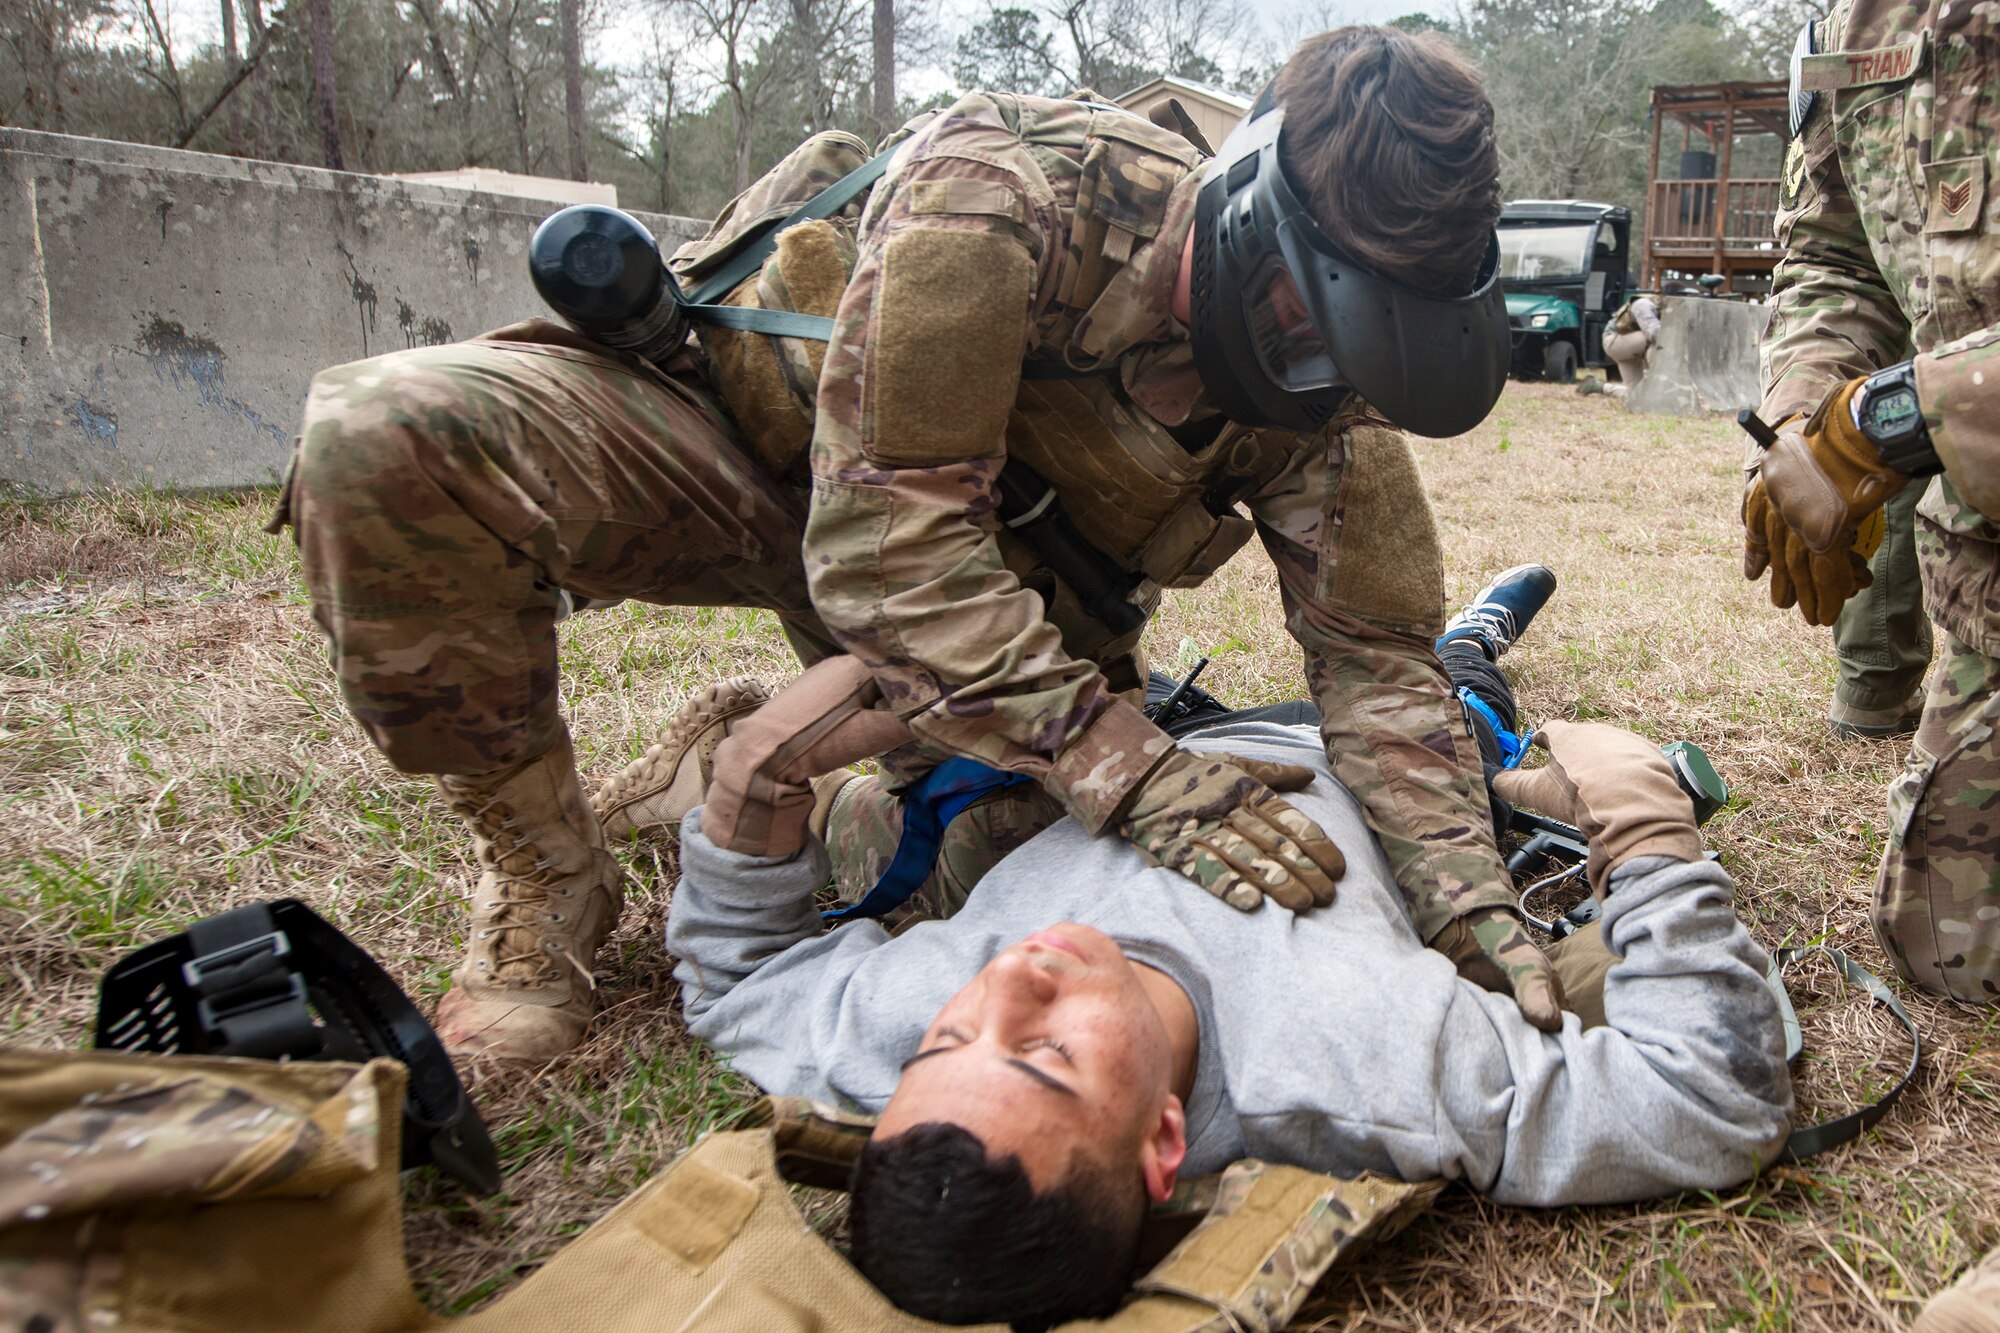 Airman 1st Class Elijah Bishop, 347th Operations Support Squadron intelligence analyst, top, examines Airman 1st Class Andruw Reyes, 23d Maintenance Squadron non-destructive inspection apprentice, Feb. 14, 2018, at Moody Air Force Base, Ga.  Airmen participated in a Tactical Combat Casualty Care (TCCC) course to better prepare themselves to combat an enemy attack while still being able to apply medical care under enemy fire.
 (U.S. Air Force photo by Airman Eugene Oliver)